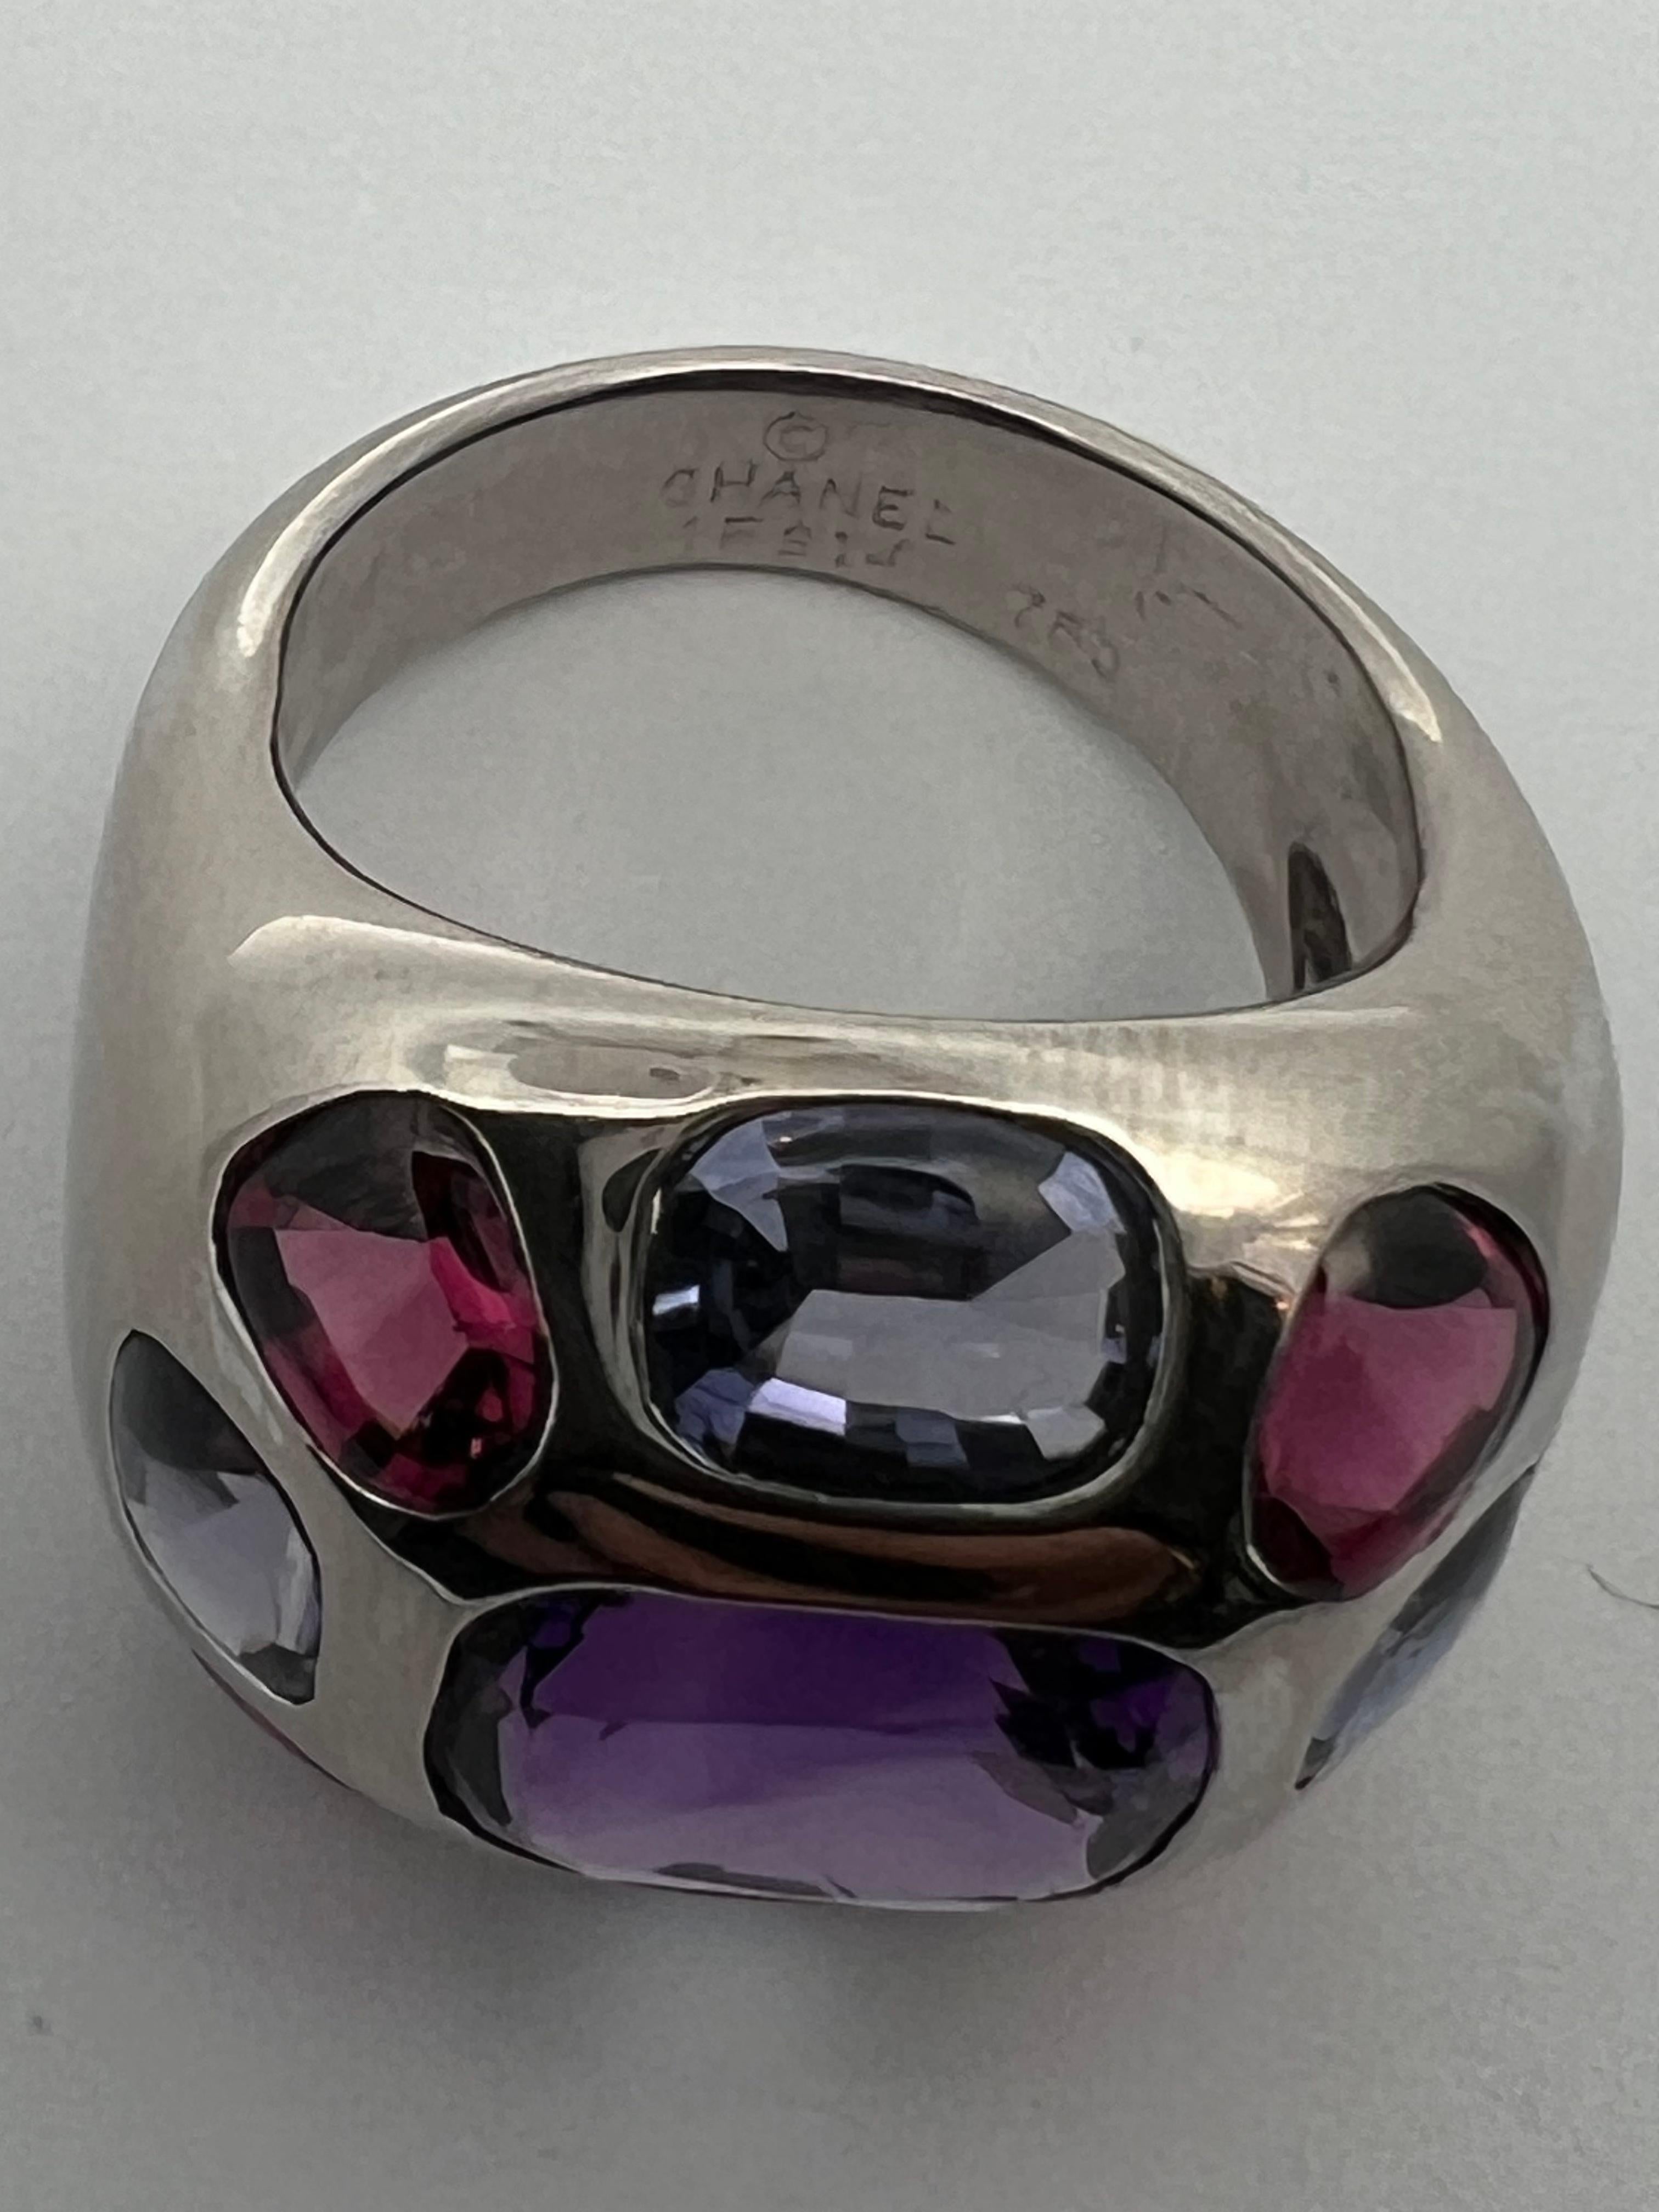 Amethyst, Garnet and Iolite, 18k white gold ring by Chanel For Sale 4